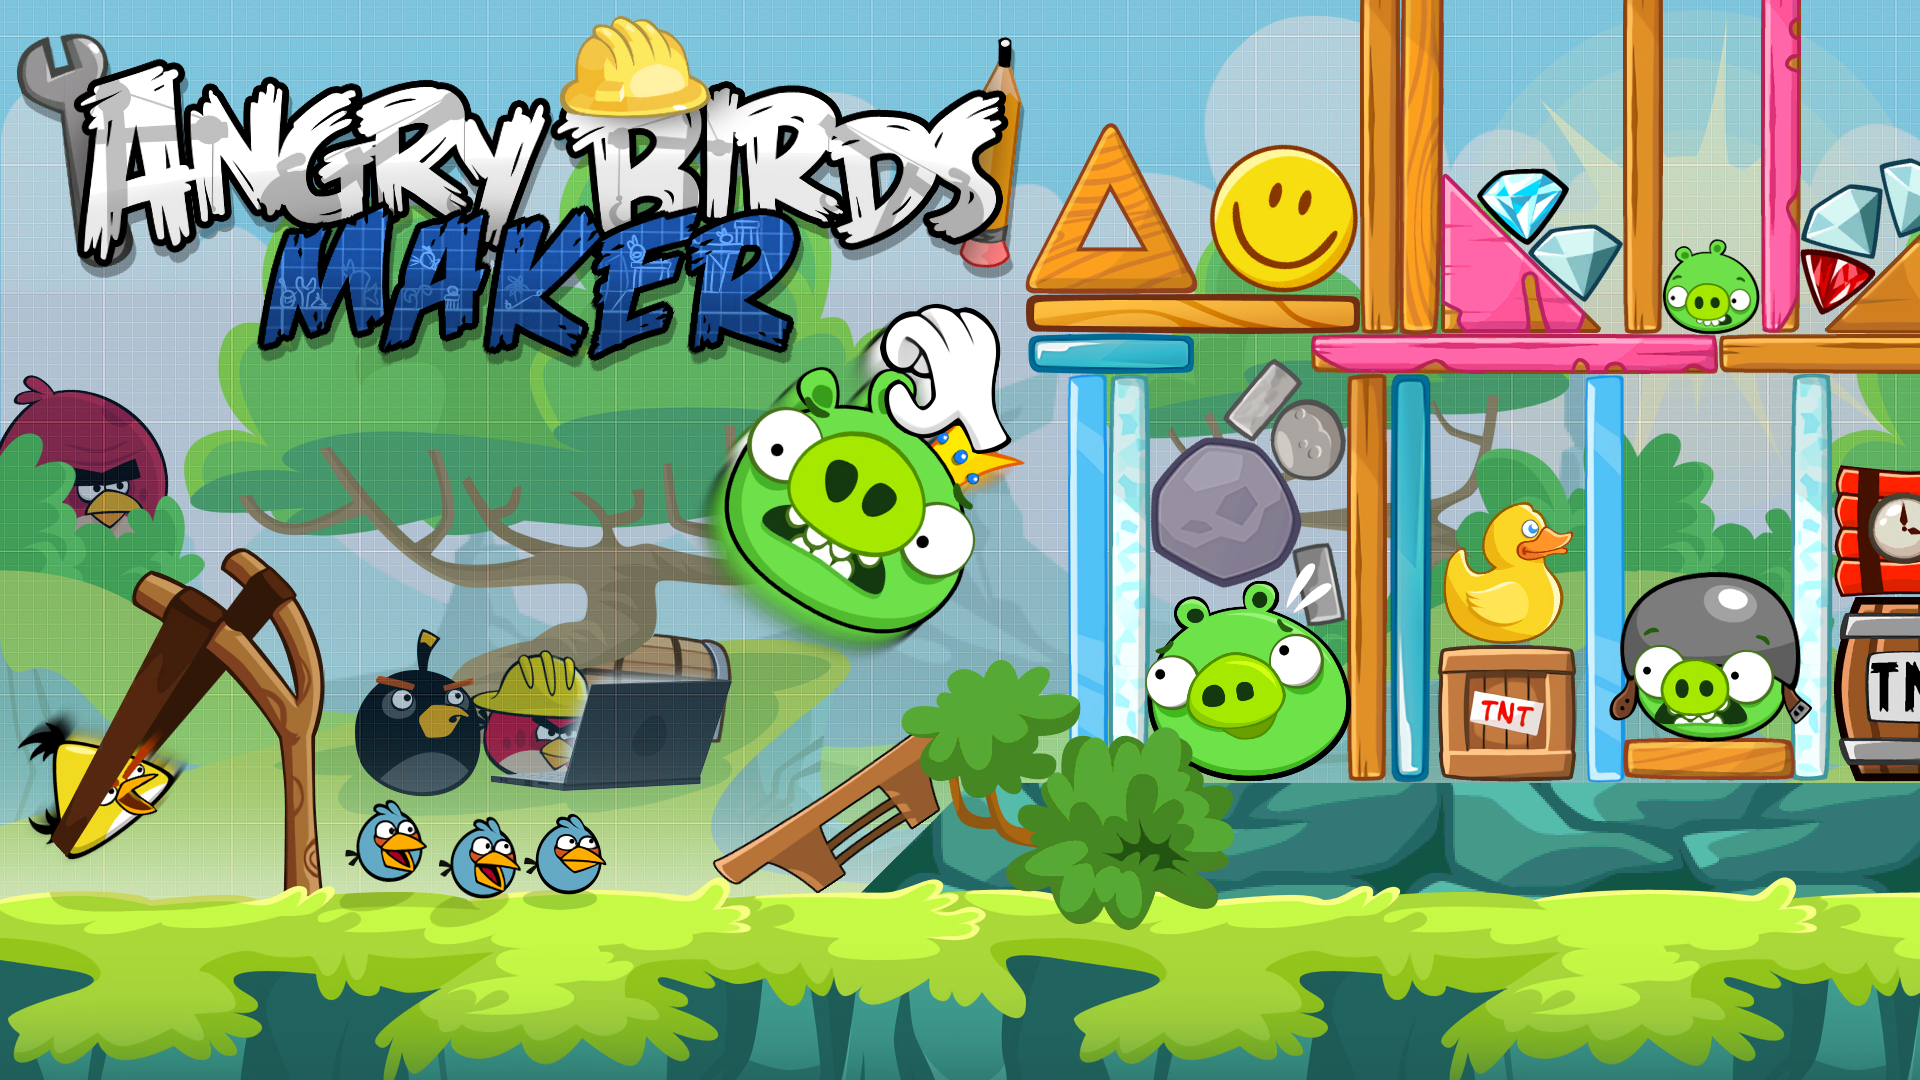 ANGRY BIRDS 2, HOW TO DOWNLOAD ANGRY BIRDS IN PC